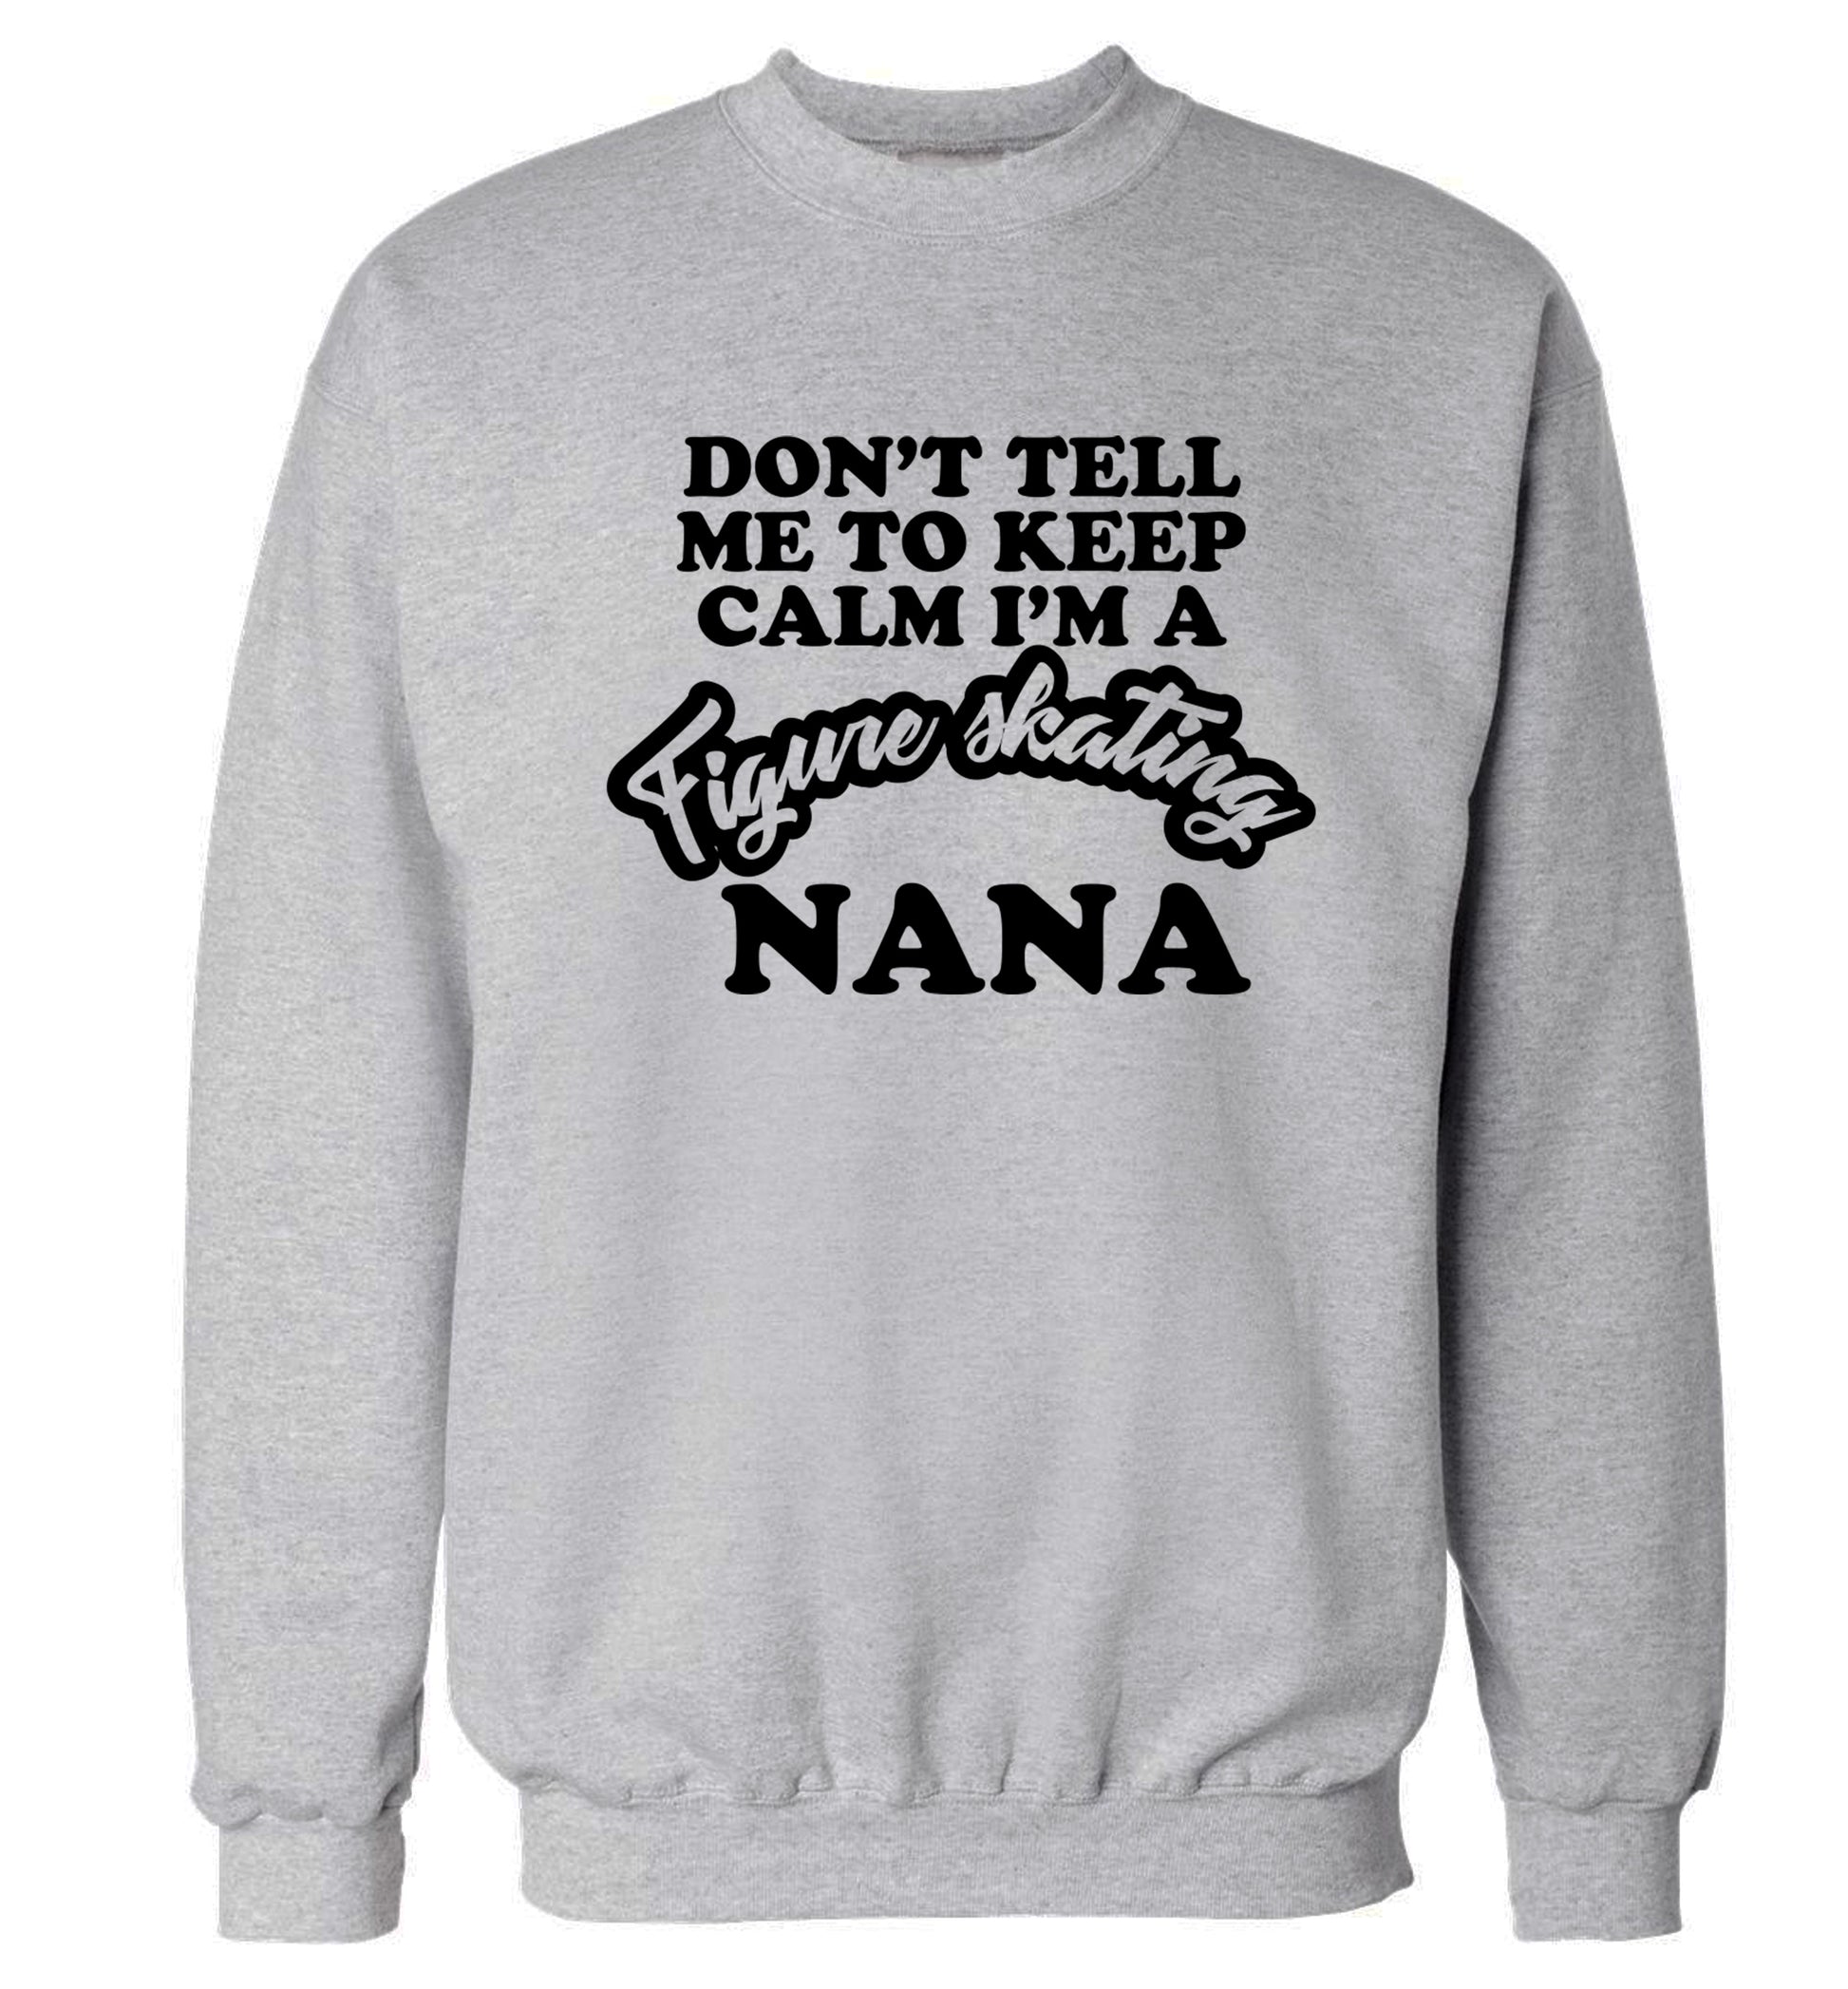 Don't tell me to keep calm I'm a figure skating nana Adult's unisexgrey Sweater 2XL